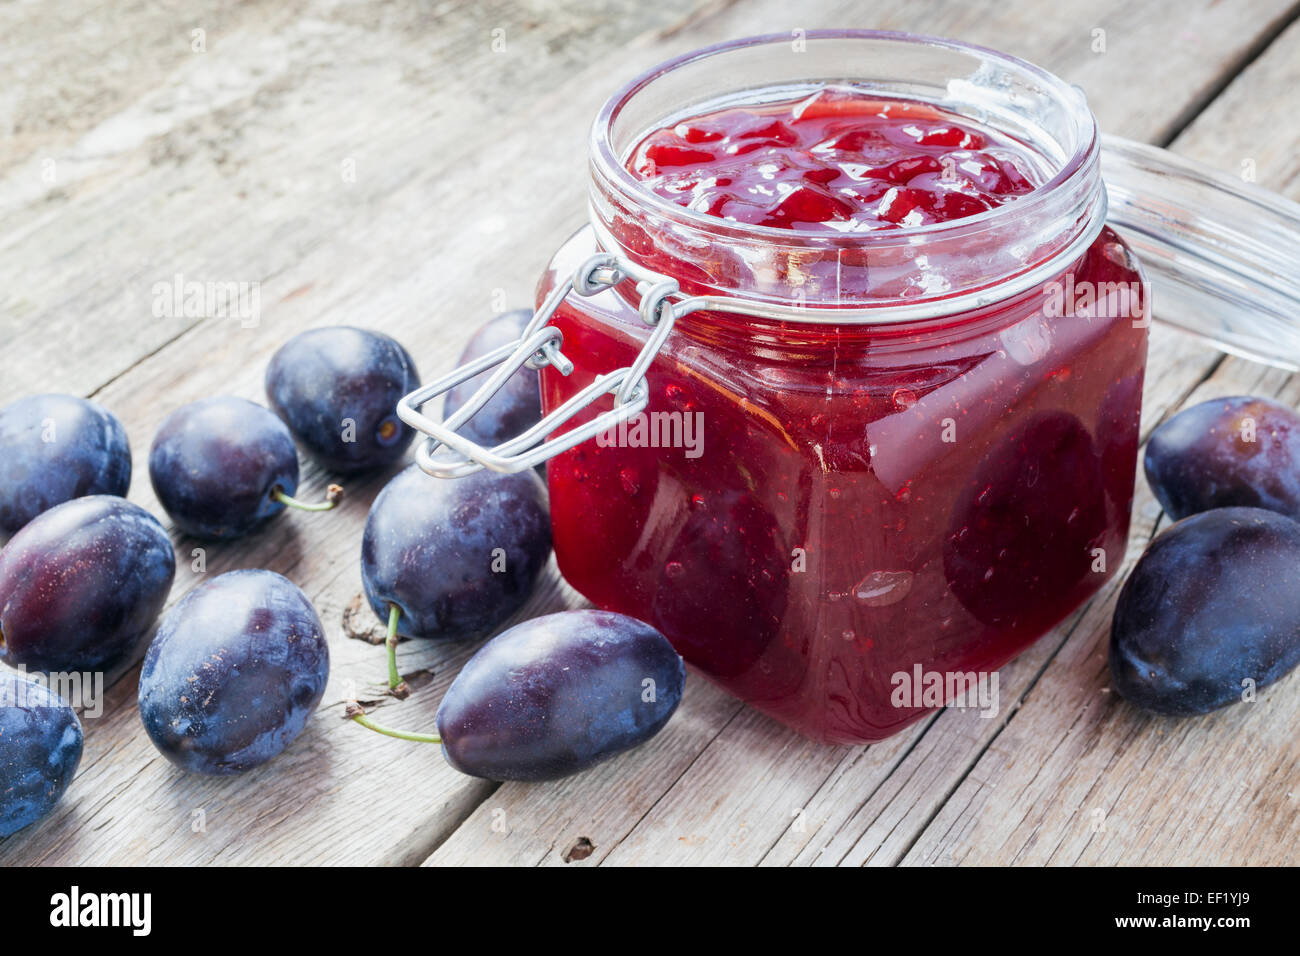 plums and jar of jam on table Stock Photo